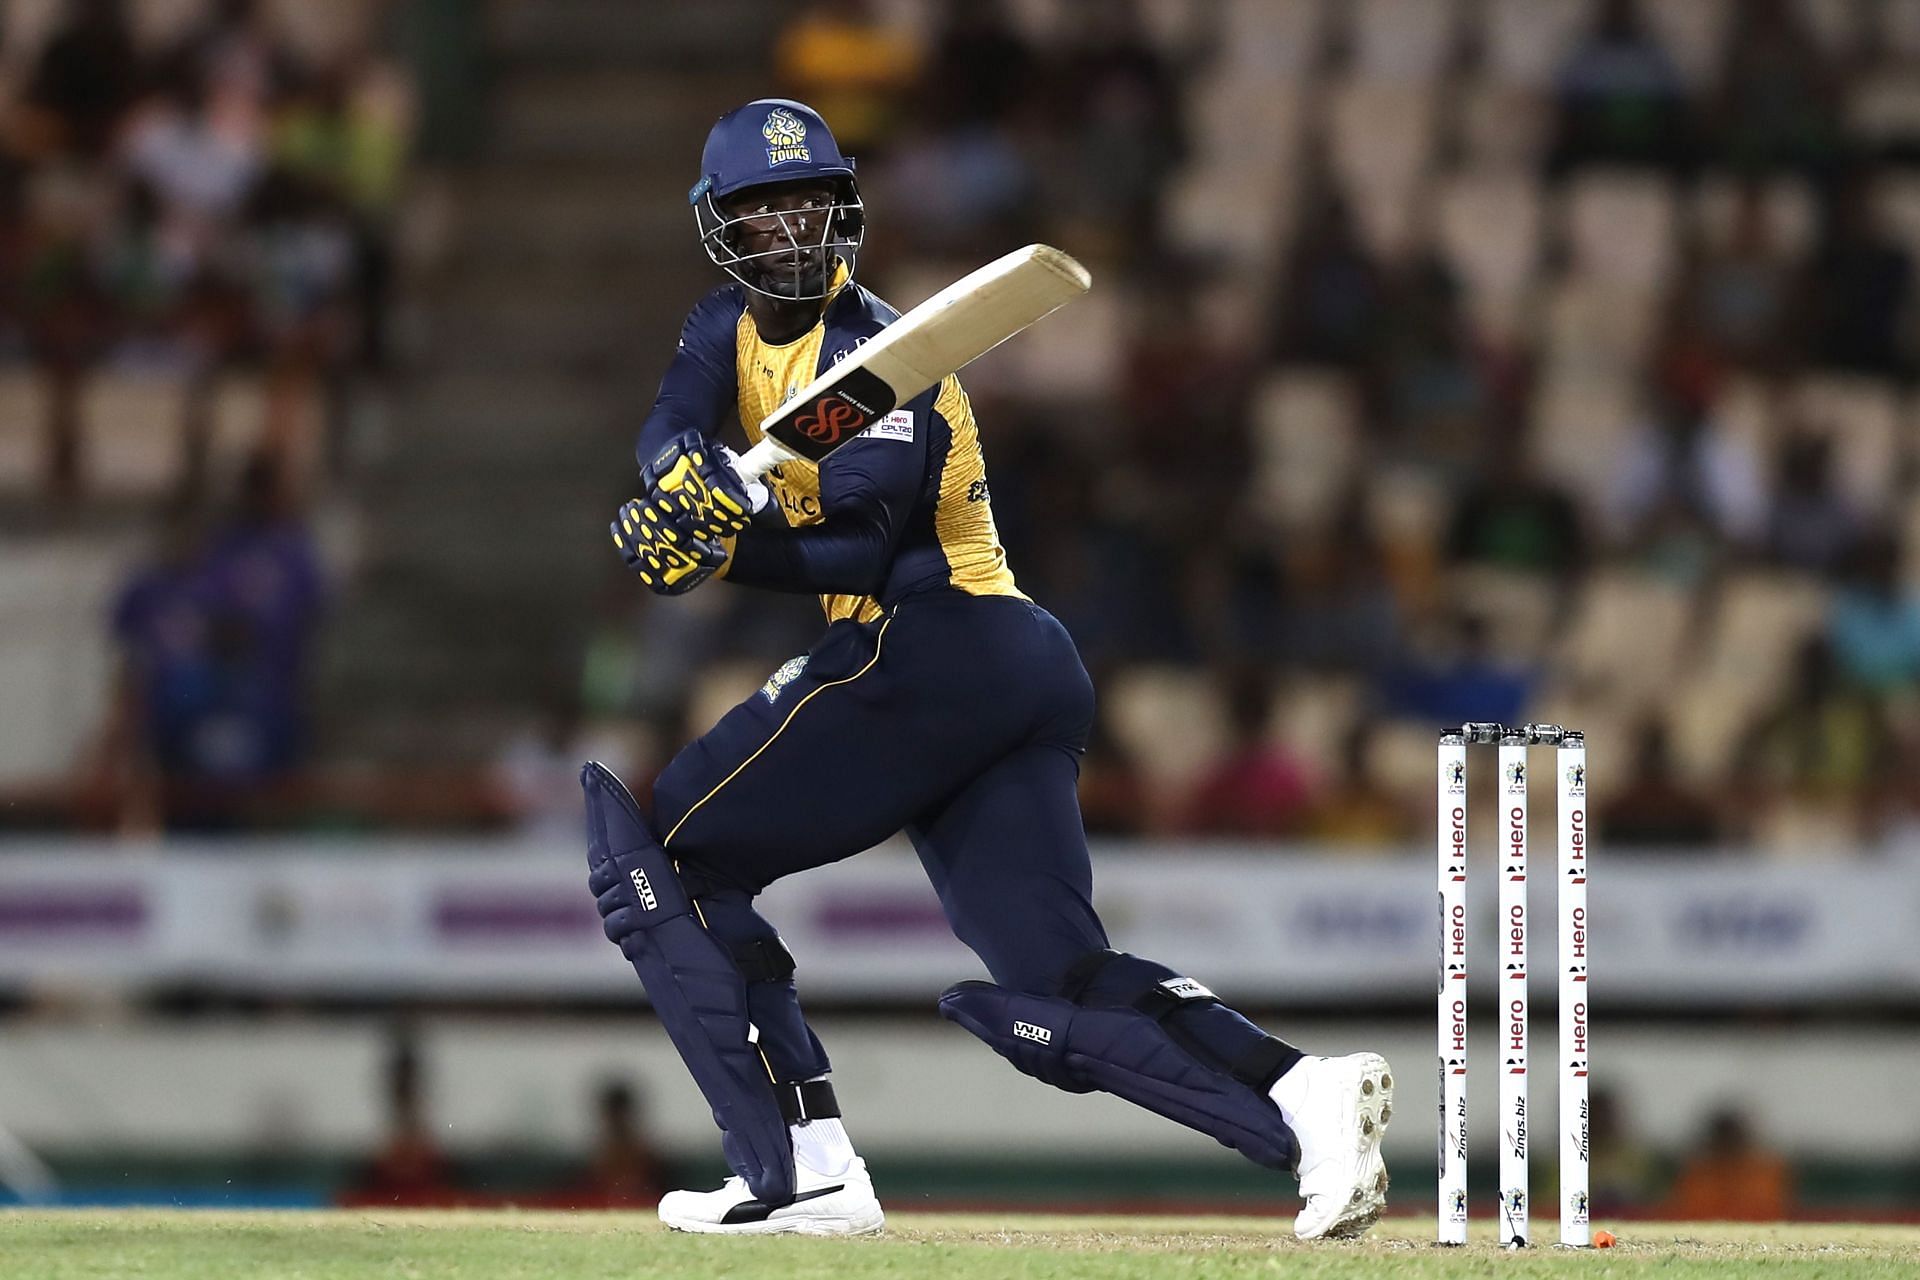 Darren Sammy struck two big sixes under pressure to clinch a spot in the Eliminator for SRH in IPL 2013 (File image).